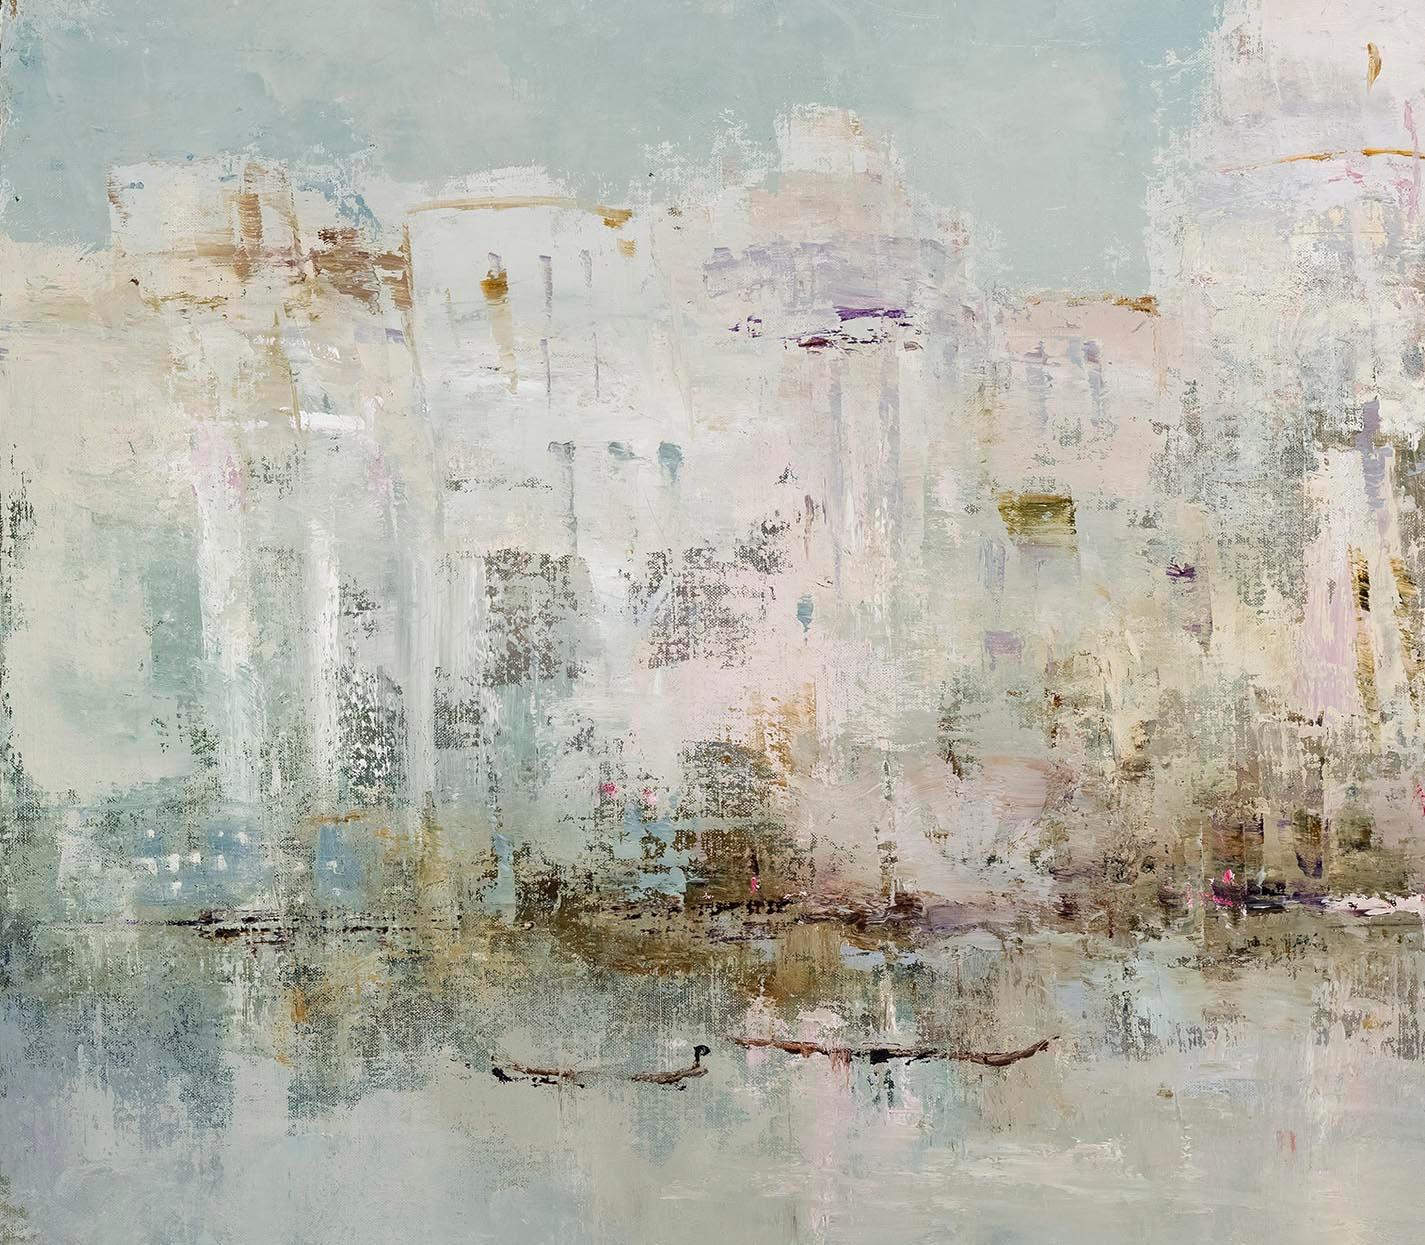 We Will Dip Our Hands to Feel What Can't Be Seen - Painting by France Jodoin